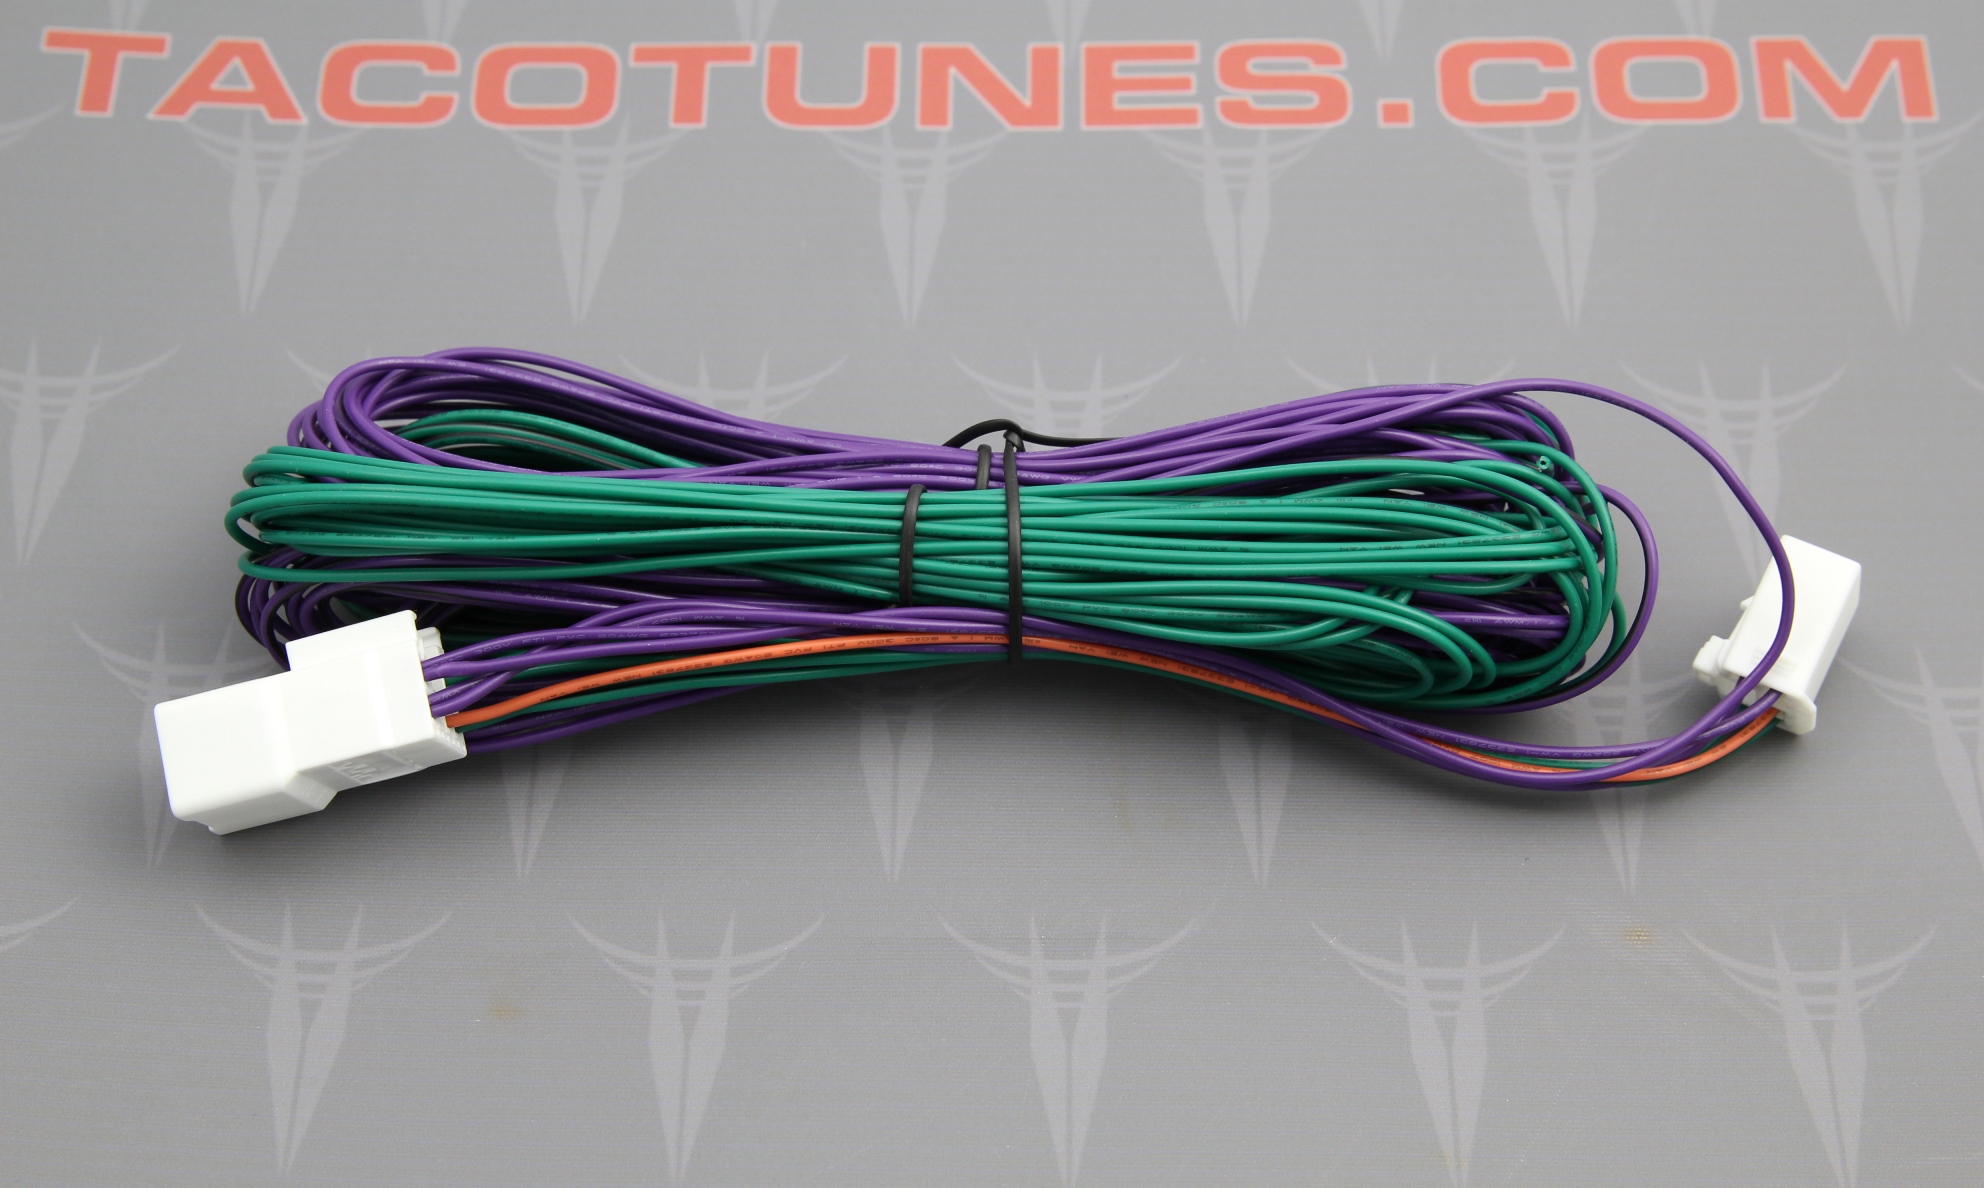 2005 Toyota Camry Stereo Wiring Harness from tacotunes.com